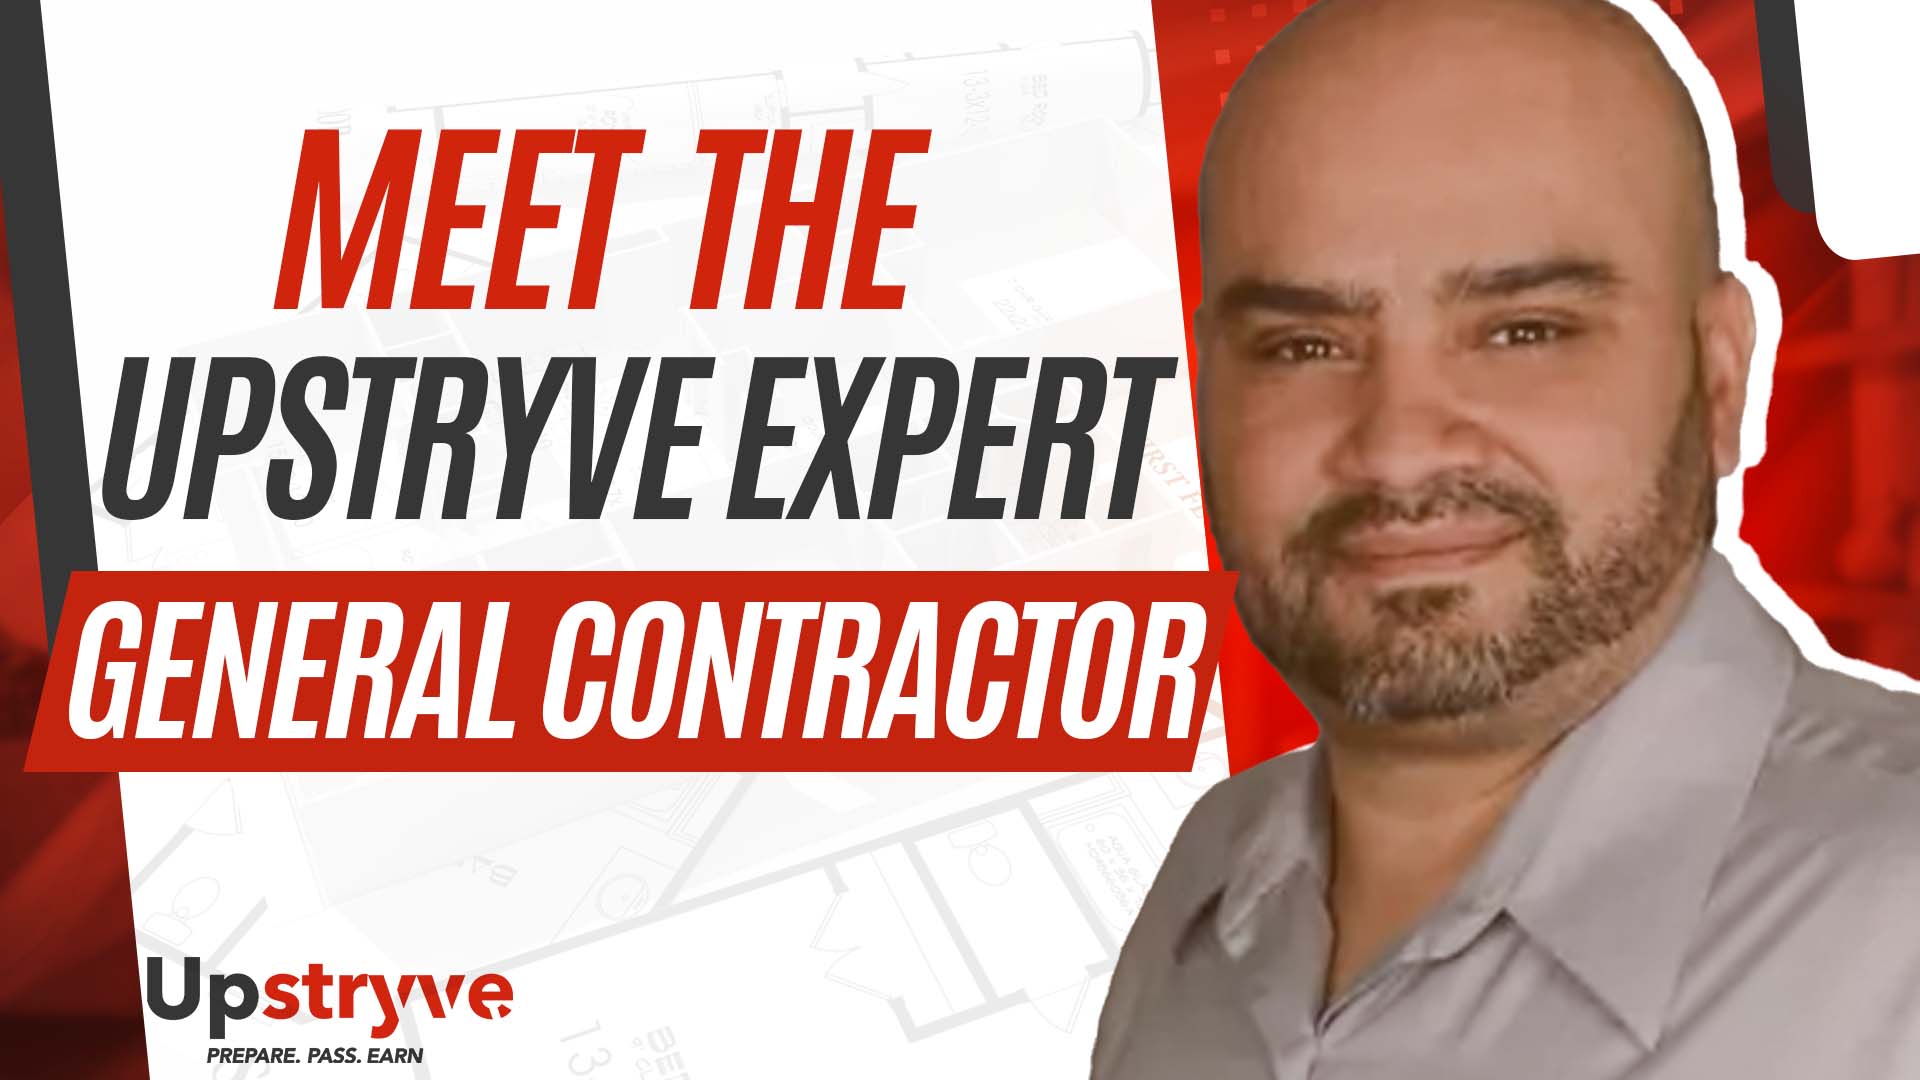 Meet Upstryve General Contractor and tutor Miguel Gutierrez from Las Vegas Nevada. Schedule a tutoring session with him today and begin to prepare for your General Contractor exam. 

Born in Chicago, Illinois, Miguel always had a vision of incorporating design with construction for a true design-build experience. With a background in Architecture, Engineering, and Construction Miguel was able to achieve this through discipline, organization, and acquired knowledge through the years participating in distinct roles on different projects. Miguel embraces the definition of Renaissance Master builders such as Michael Angelo and their theories of practice to modern-day applications. For Example, Miguel would be found in the trenches with concrete form setters one day, and then on top of a beam the next day with a framing crew. Very early on in my career, I found out the hard way that the design disciplines had little to no interaction with the trades. Working with senior-level Architects on major projects early in my career I realized there was a strict separation between design and physical work occurring in the field. Projects would run out of control with Change Orders, RFI’s, and Lack of conveyance of design intent with your original design idea vanishing into thin air with only a mere shadow of the original design being built. I quickly realized that by offering a true design-build experience projects would run under budget, and the original design idea not being lost by communicating directly with the trades.

 

EXPERIENCE:
Very early in my career, I was gifted with the opportunity to teach and tutor students at the University of Nevada Las Vegas.  I taught for 2 years prior to starting my Architectural firm in 2010, which since then has evolved to a Design-Build Construction Firm that has been in operation since 2012.

SPECIALTIES:
General Contractor Residential
General Contractor Commercial
Electrical Photovoltaics
Design-Build Contractor
Development
Multifamily Contractor
Excavation and Grading
Utilities and Offsite Improvements
Construction Document Production
Roofing Contractor 
Framing Contractor
Drywall Contractor 
Concrete Contractor 
Restaurant Design and Development
Land Development and Zoning Changes
Risk Management
Estimating and Project Management
EDUCATION:
Associate of Arts
Associate of Science
Bachelor of Fine Arts in Architecture
Bachelor of Science in Construction Management
Licenses held in the state of Nevada are as follows:
B2
C2G
C3
Manufactured Housing

TUTORING LANGUAGE: 
English

Spanish

Contact Miguel Today: https://upstryve.com/products/miguel-gutierrez
Website: https://www.upstryve.com
Book Store: https://store.upstryve.com

Need more help with your trade exam prep? Click here and match with one of our experts 👉 https://upstryve.com/pages/by-trade

Interested in becoming a tutor? Join the team 👉 https://upstryve.com/pages/how-to-become-a-tutor

Subscribe to our channel: http://bit.ly/UpStryveYouTubeChannel
Join us on Facebook: https://www.facebook.com/upstryveinc
Follow us on Instagram : https://www.instagram.com/upstryve

ABOUT Miguel:
Born in Chicago, Illinois, Miguel always had a vision of incorporating design with construction for a true design-build experience. With a background in Architecture, Engineering, and Construction Miguel was able to achieve this through discipline, organization, and acquired knowledge through the years participating in distinct roles on different projects. Miguel embraces the definition of Renaissance Master builders such as Michael Angelo and their theories of practice to modern-day applications. For Example, Miguel would be found in the trenches with concrete form setters one day, and then on top of a beam the next day with a framing crew. Very early on in my career, I found out the hard way that the design disciplines had little to no interaction with the trades. Working with senior-level Architects on major projects early in my career I realized there was a strict separation between design and physical work occurring in the field. Projects would run out of control with Change Orders, RFI’s, and Lack of conveyance of design intent with your original design idea vanishing into thin air with only a mere shadow of the original design being built. I quickly realized that by offering a true design-build experience projects would run under budget, and the original design idea not being lost by communicating directly with the trades.

EXPERIENCE:
Very early in my career, I was gifted with the opportunity to teach and tutor students at the University of Nevada Las Vegas.  I taught for 2 years prior to starting my Architectural firm in 2010, which since then has evolved to a Design-Build Construction Firm that has been in operation since 2012.

EDUCATION:
Associate of Arts
Associate of Science
Bachelor of Fine Arts in Architecture
Bachelor of Science in Construction Management
Licenses held in the state of Nevada are as follows:
B2
C2G
C3
Manufactured Housing

TUTORING LANGUAGE: 
English

Upstryve is the only tutoring platform dedicated to providing aspiring professionals an affordable all-encompassing learning experience. We provide 1-on-1 personalized online exam and licensing prep for professionals to confidently pass their state or national exams and get their license.

We use our proprietary matching platform to link aspiring professionals with expert tutors and instructors who have years of experience in the field. Students personally work with tutors who guide them through typical struggles and help students gain the confidence they need before exam day. Our instructors specialize in exam preparation for all construction and trades, National Trade Association Exams, Contractors, Electricians, Plumbing, HVAC, Engineering, Healthcare, Utilities and more.

Our goal at Upstryve is to help you Prepare, Pass and Earn so that your future has limitless success.

#Upstryve #GeneralContractor #Contractor